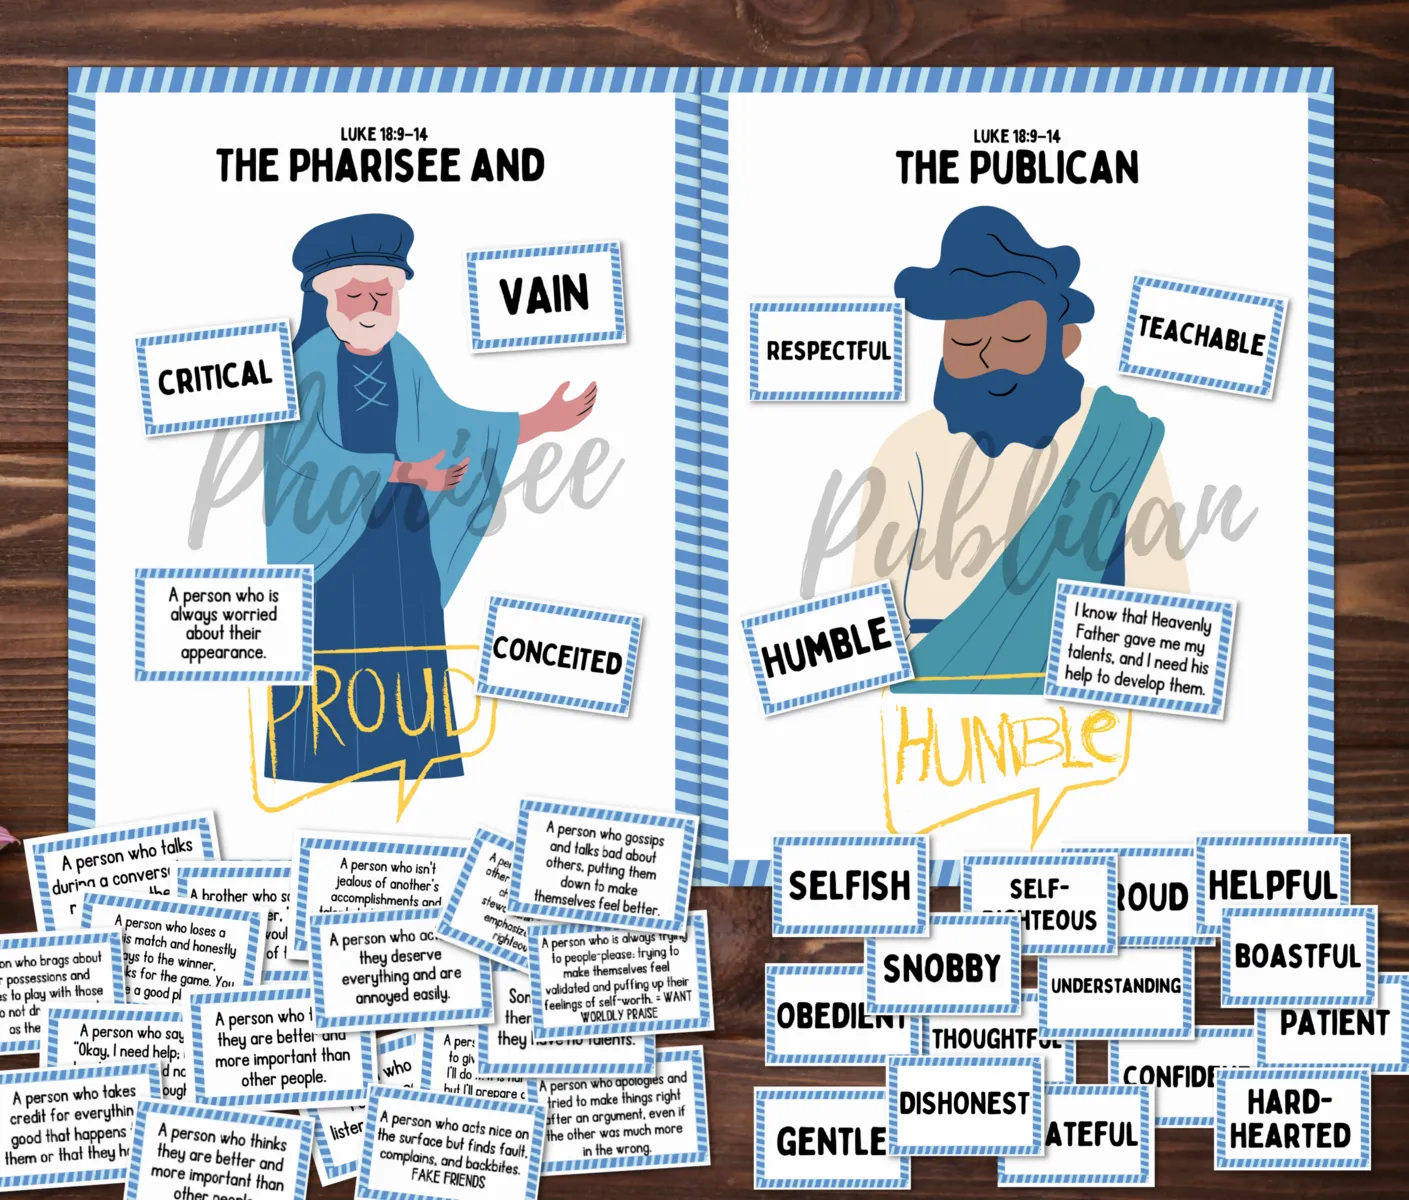 Parable of the pharisee publican bible lesson activities for kids